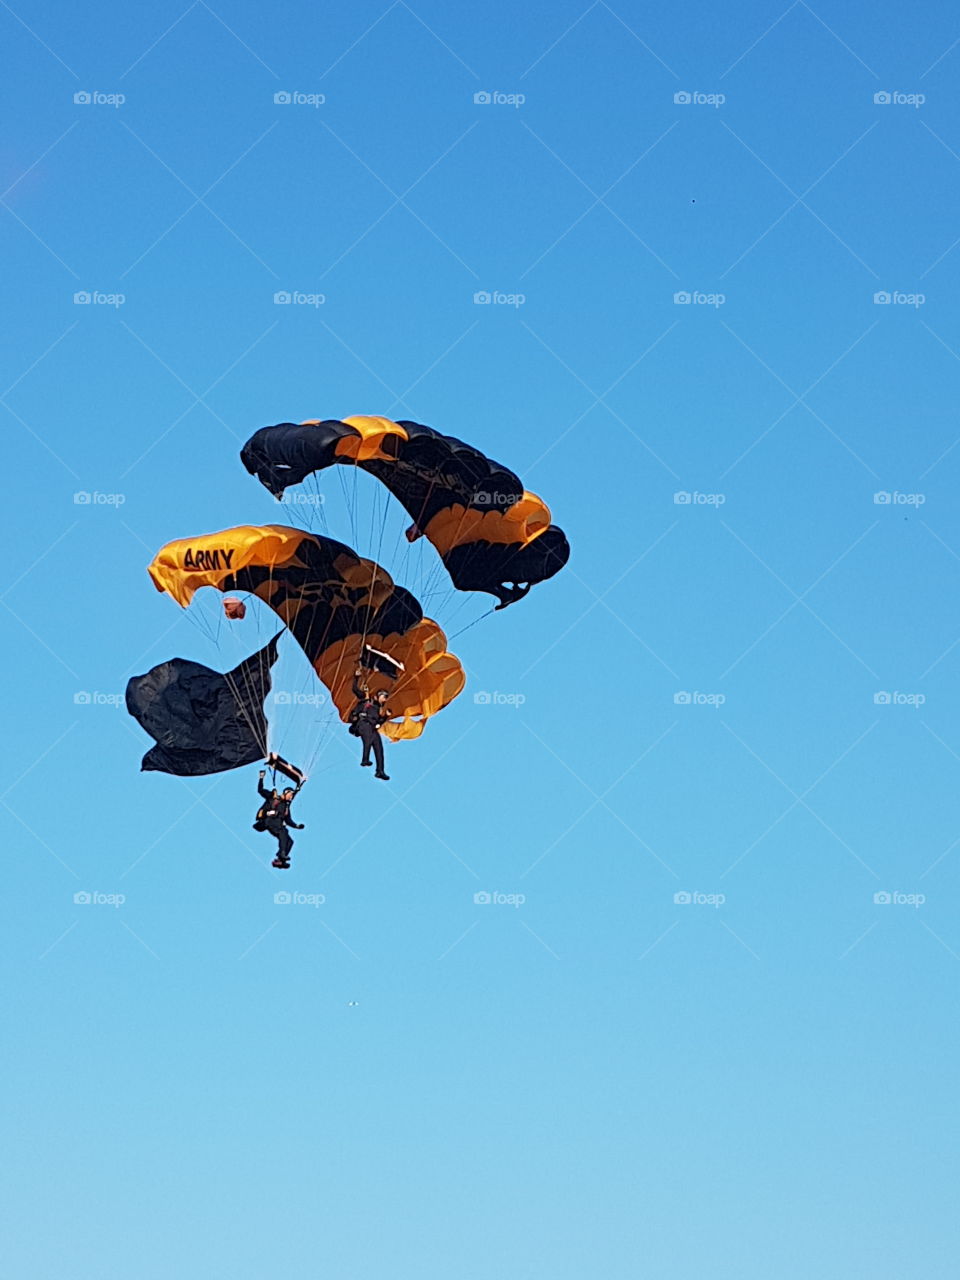 US Army Golden Knights parachuting in tandem in bright blue skies